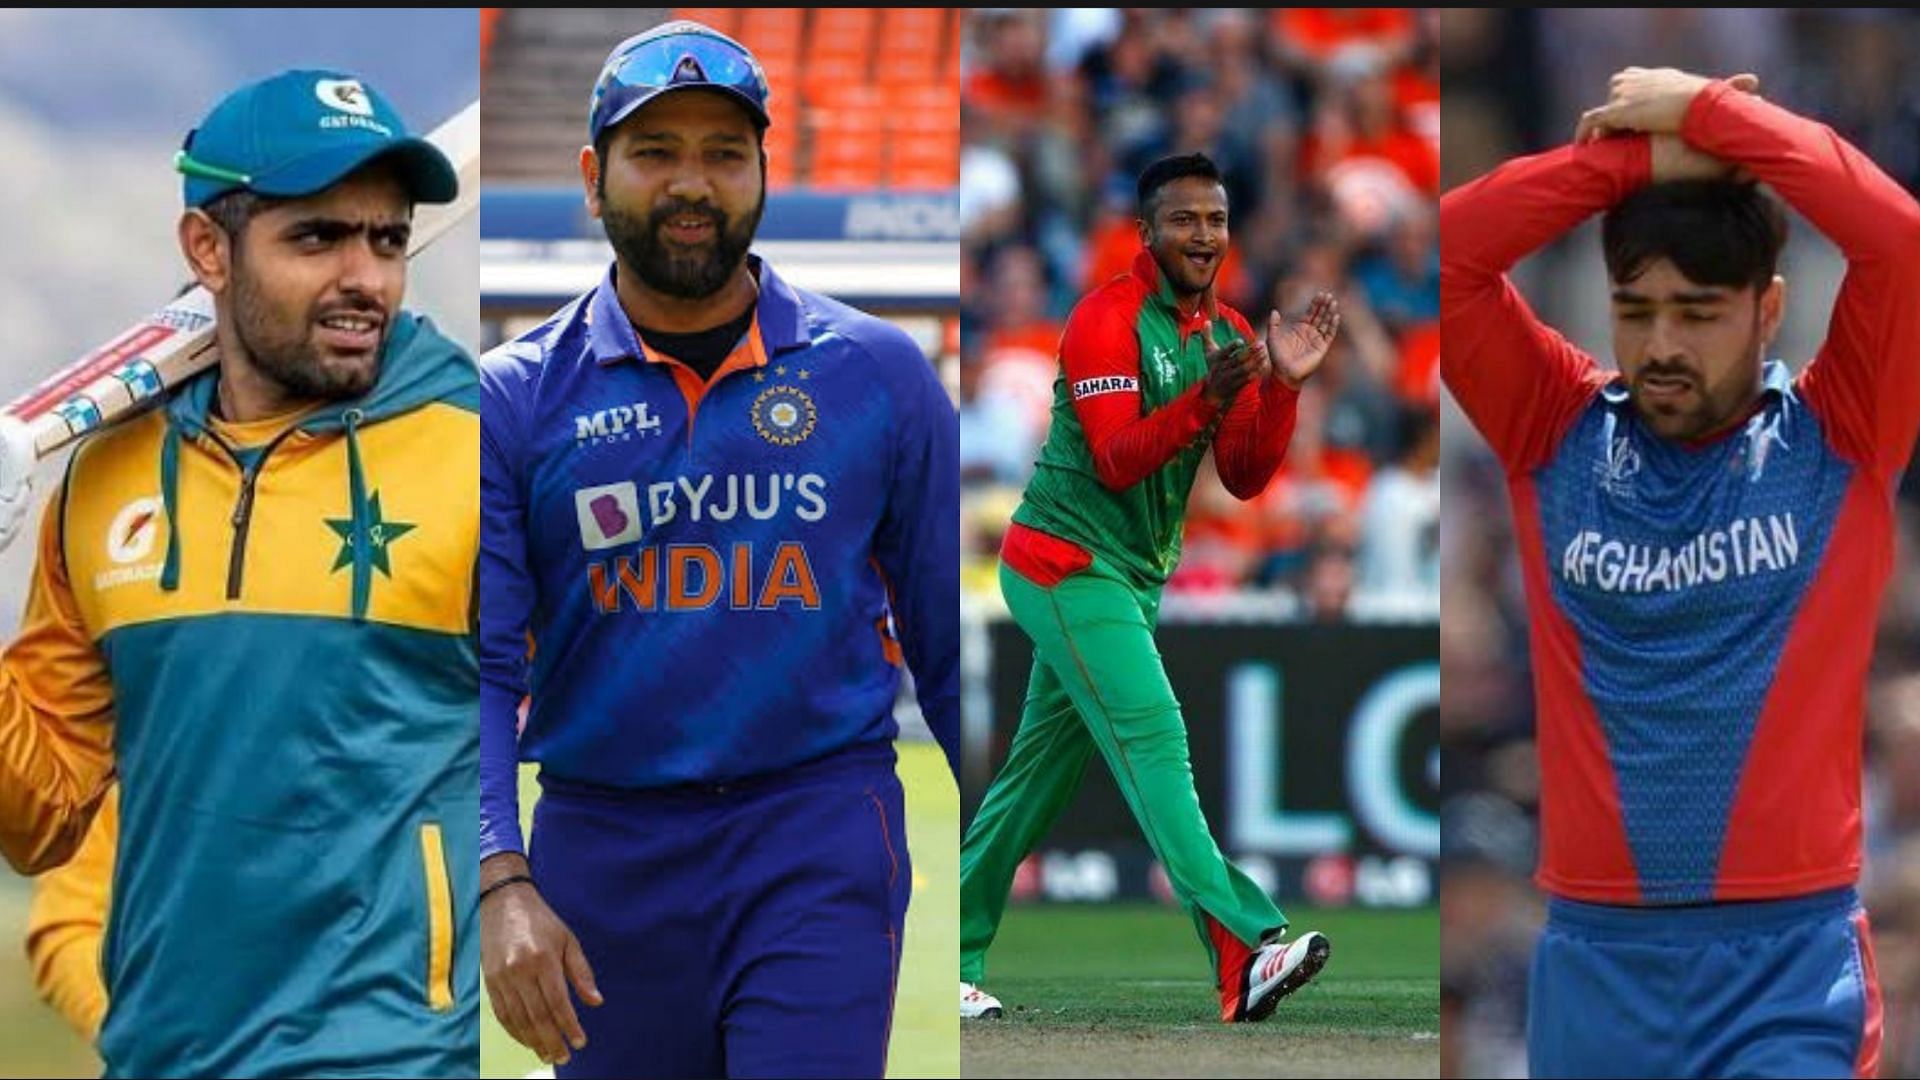 Asia Cup 2022 Live Streaming & Broadcast Details: When & where to watch?